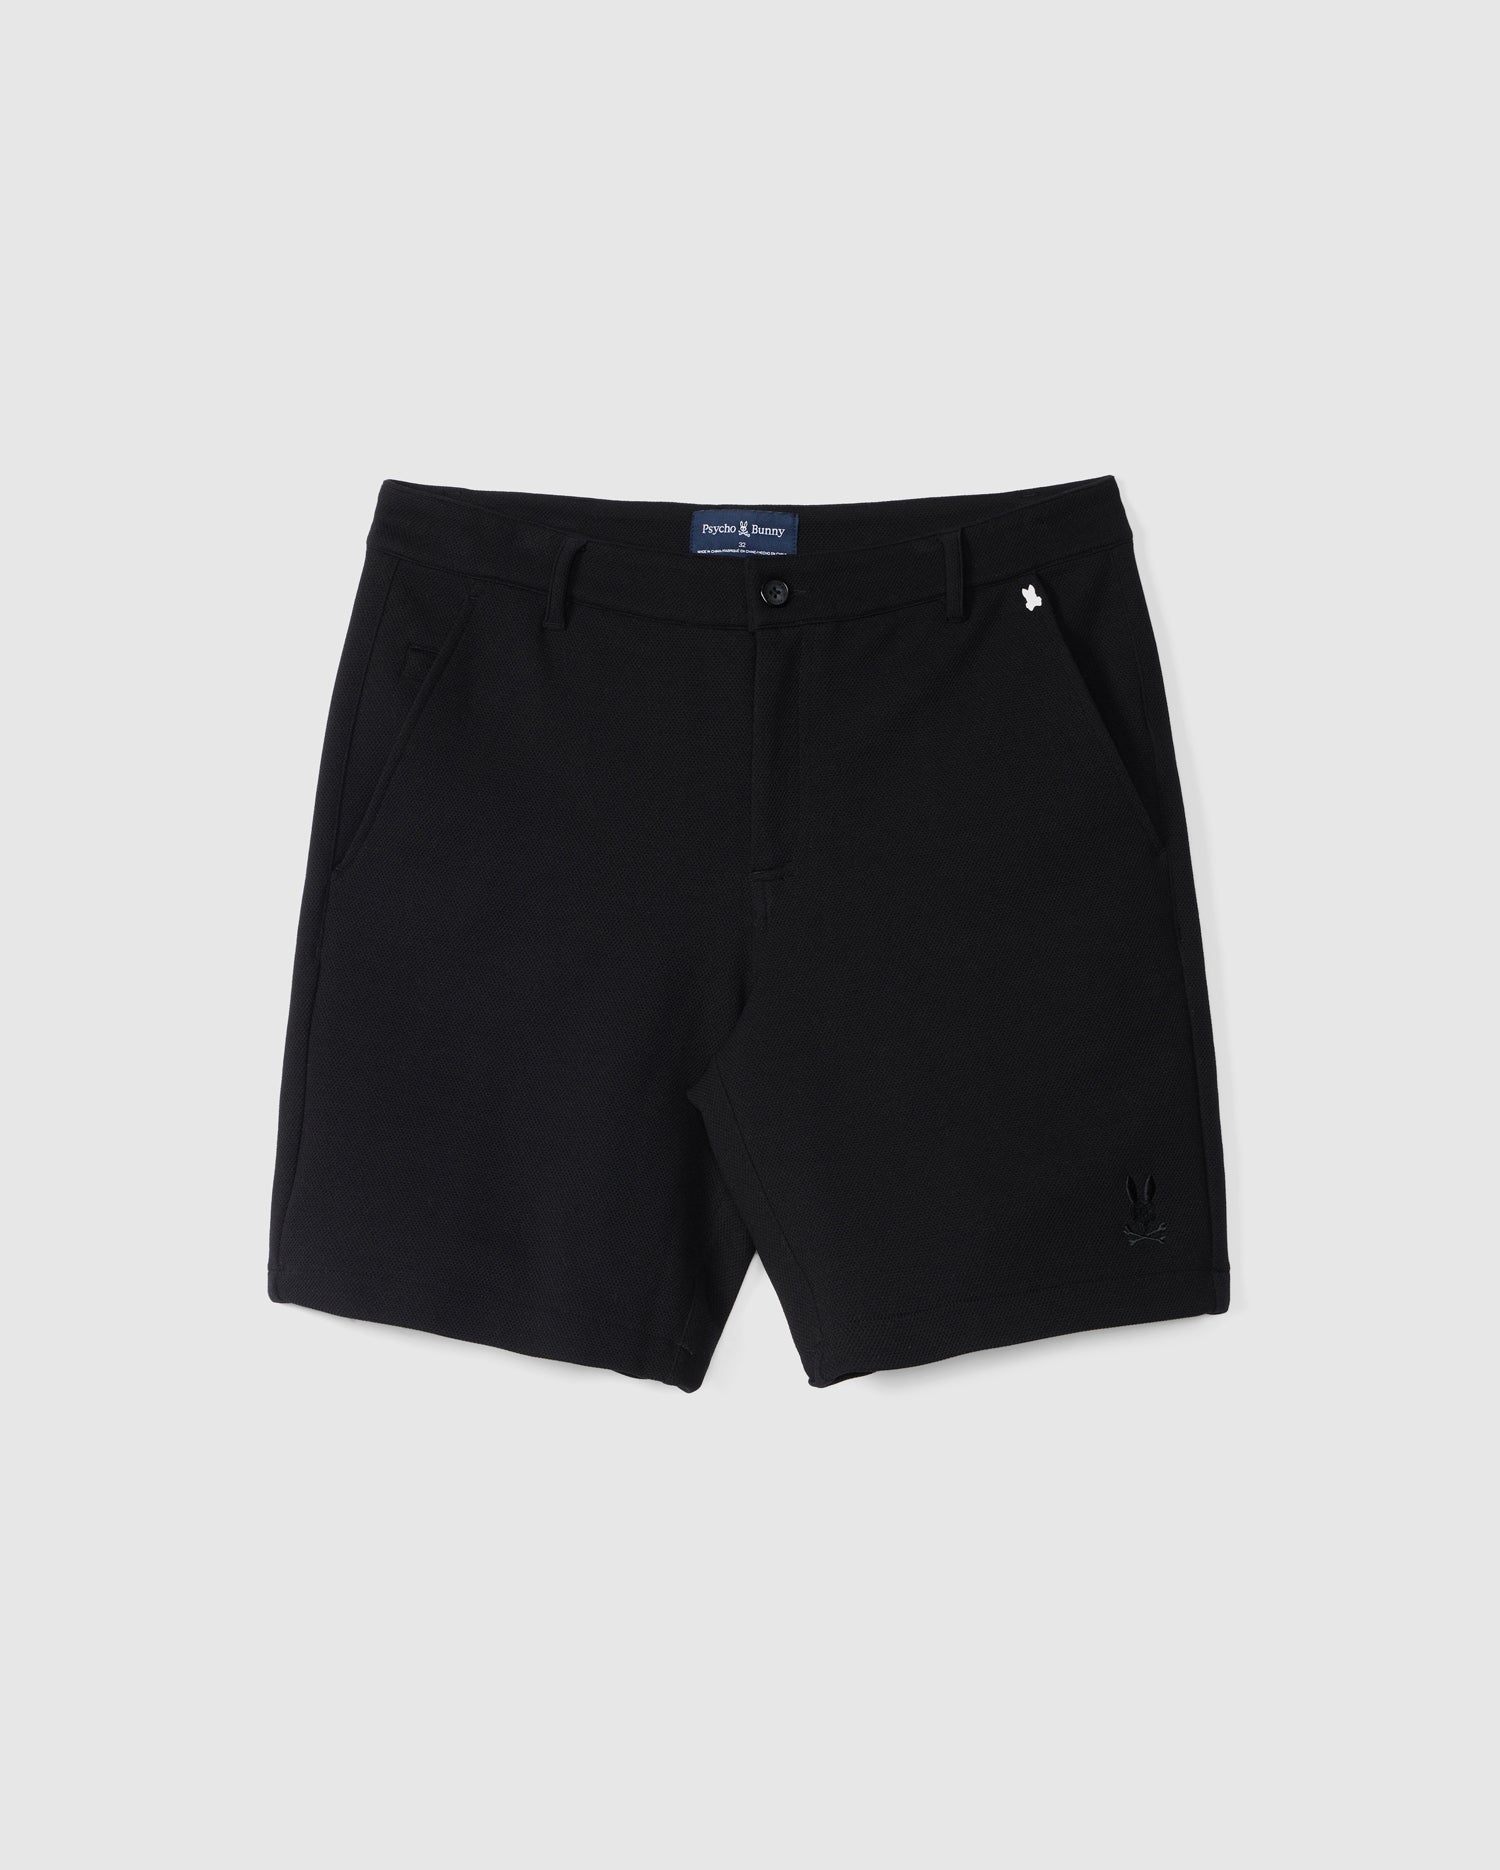 Black tailored shorts with a button and zip closure, displayed flat on a neutral background, featuring discreet side pockets and a small visible Psycho Bunny logo on the left leg. These MENS SHIRO KNIT HONEYCOMB SHORT - B6R567C200 boast a structured texture for added detail.